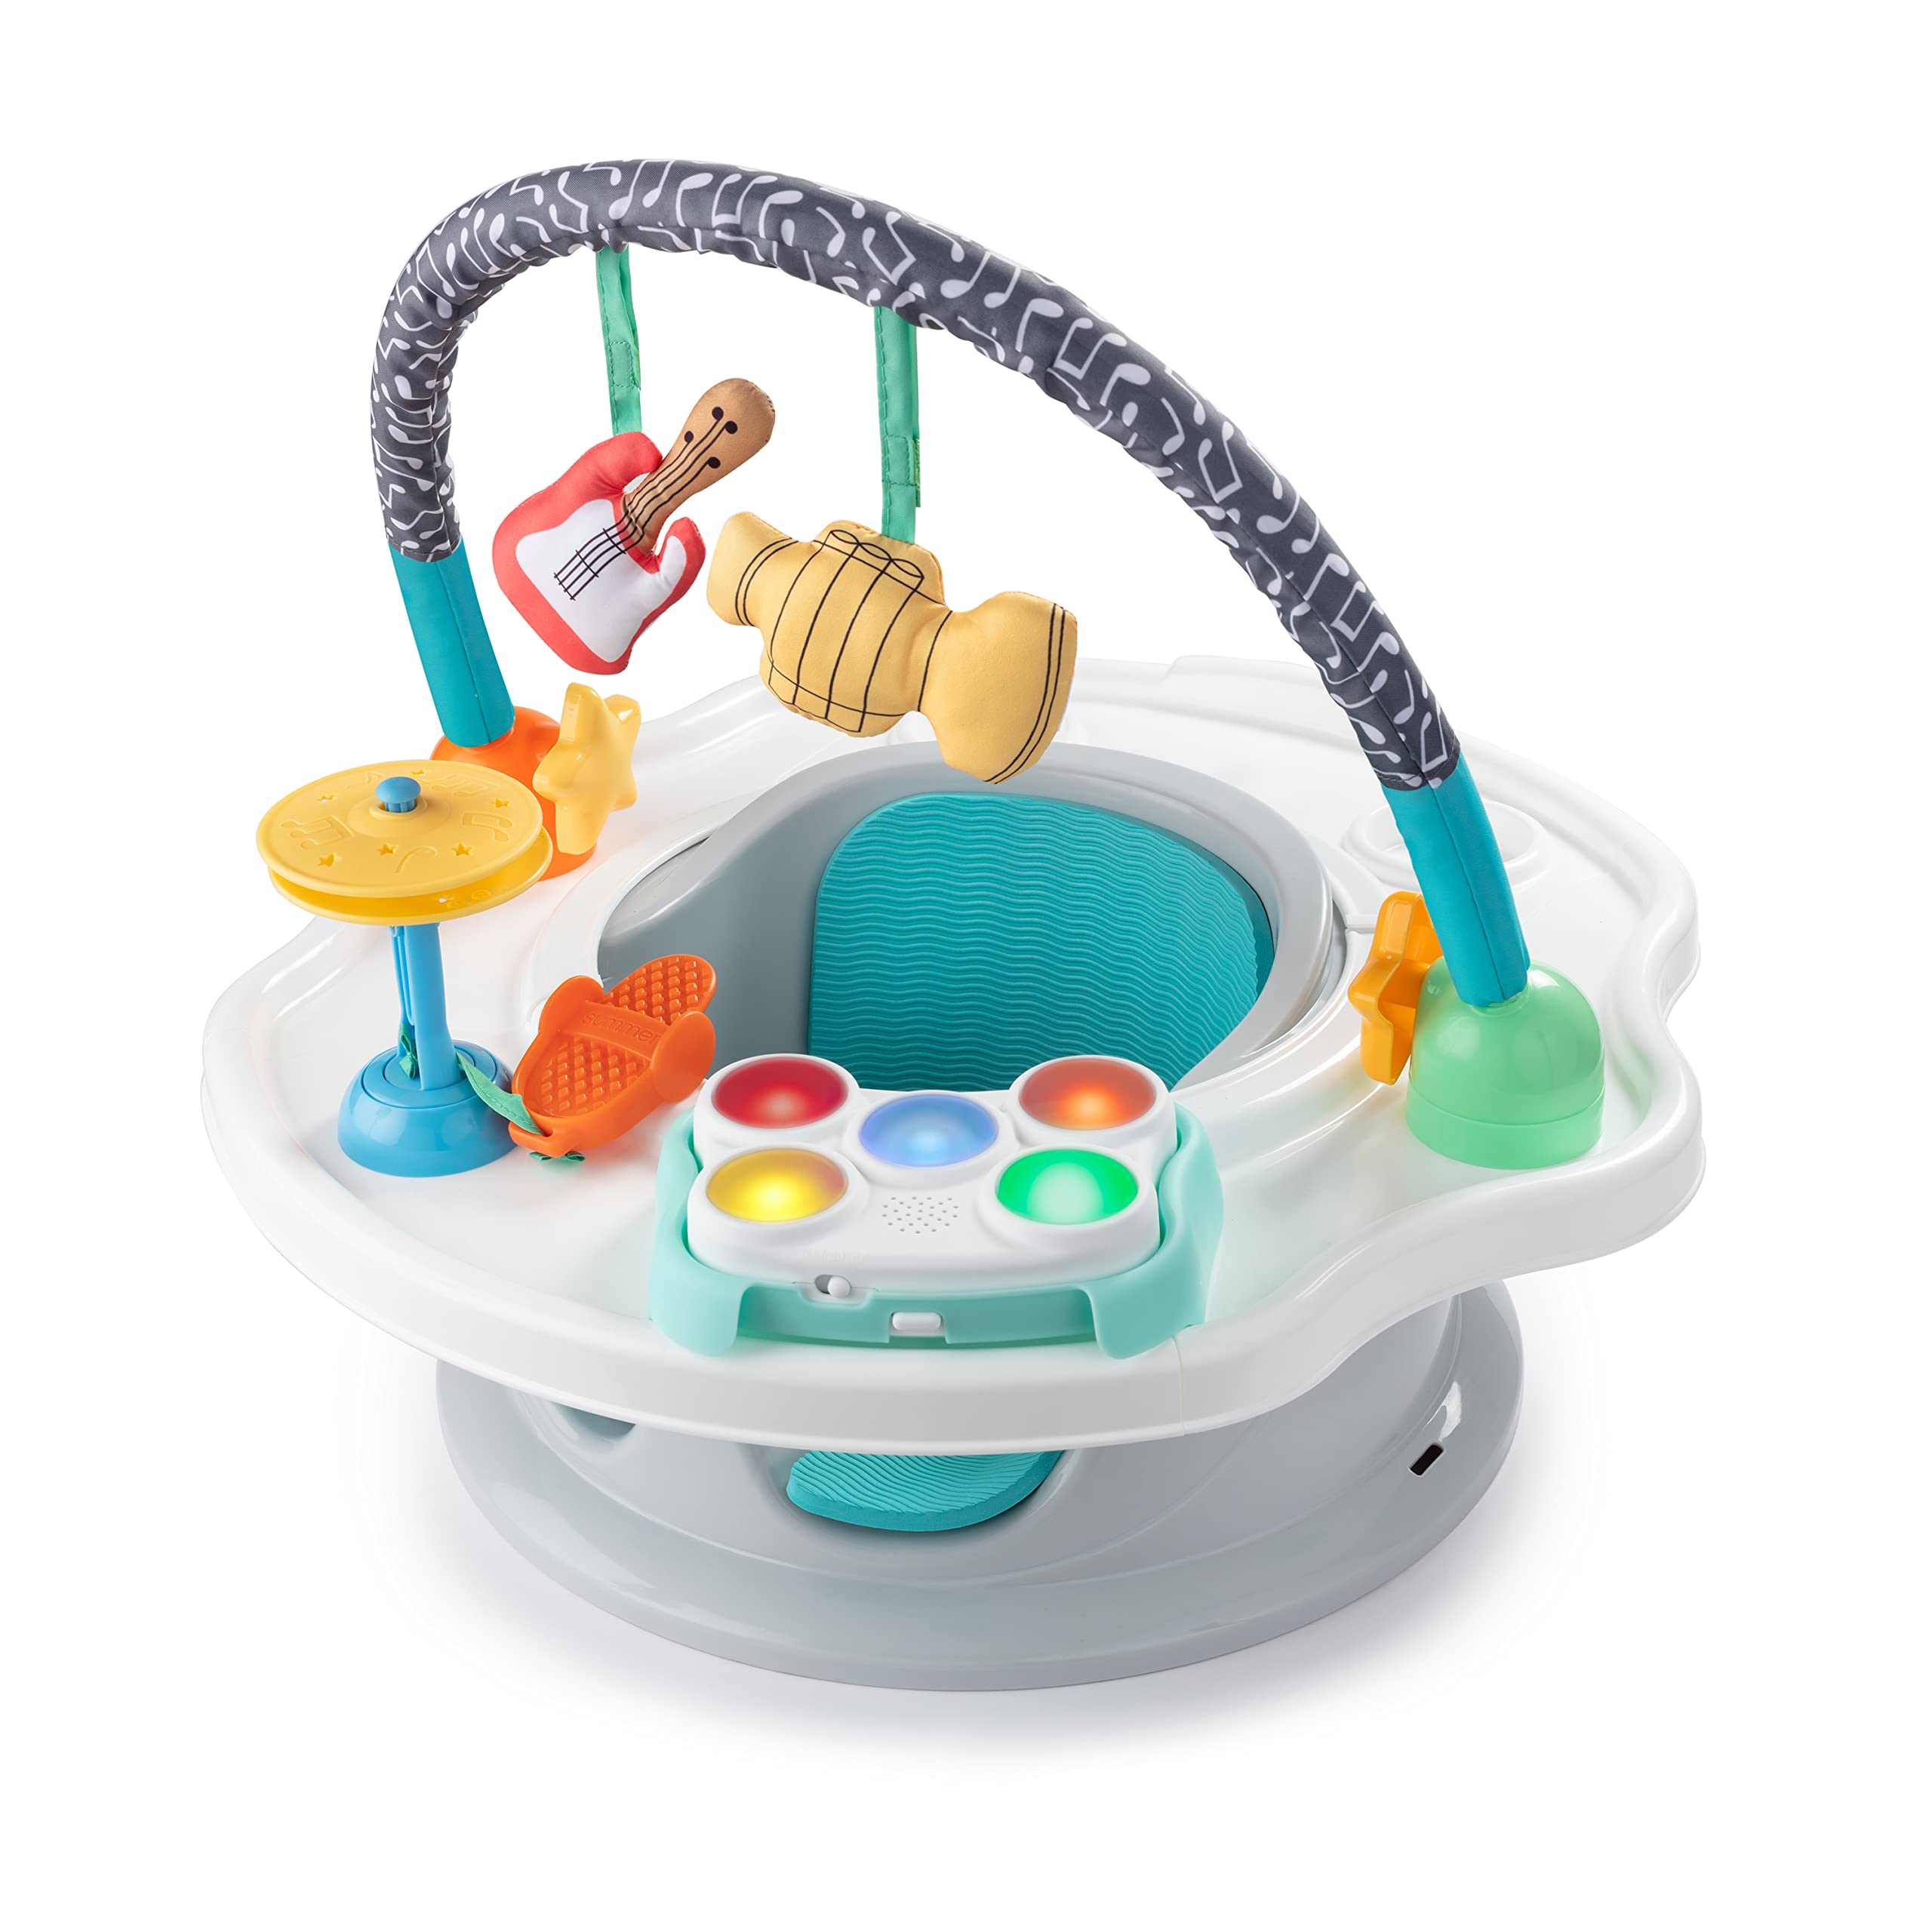 Summer 3-Stage Deluxe SuperSeat (Baby Beats) Positioner, Booster, and Activity Center for Baby